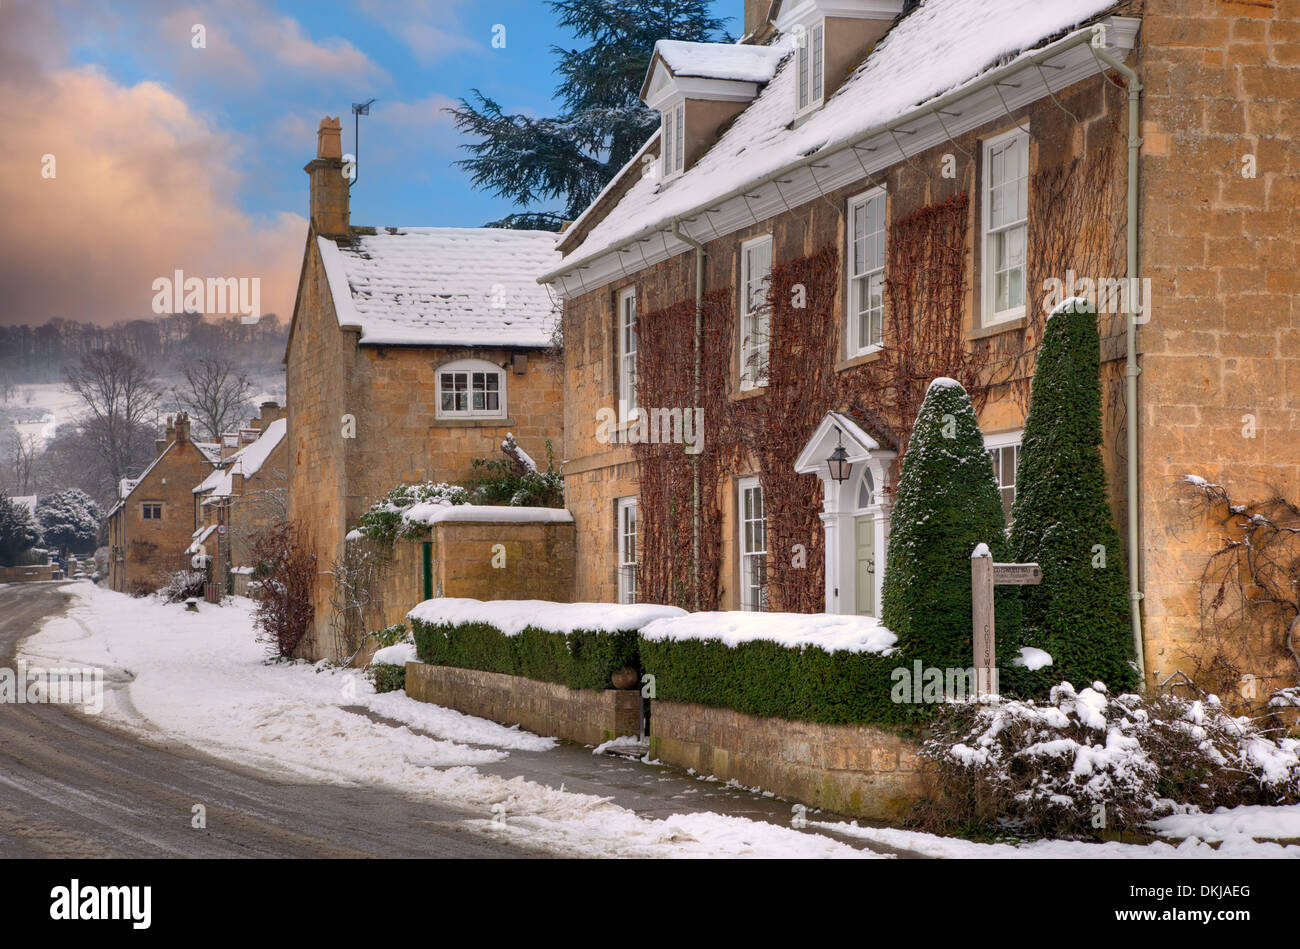 Cotswold House and cottages dans la neige, Broadway, Worcestershire, Angleterre. Banque D'Images